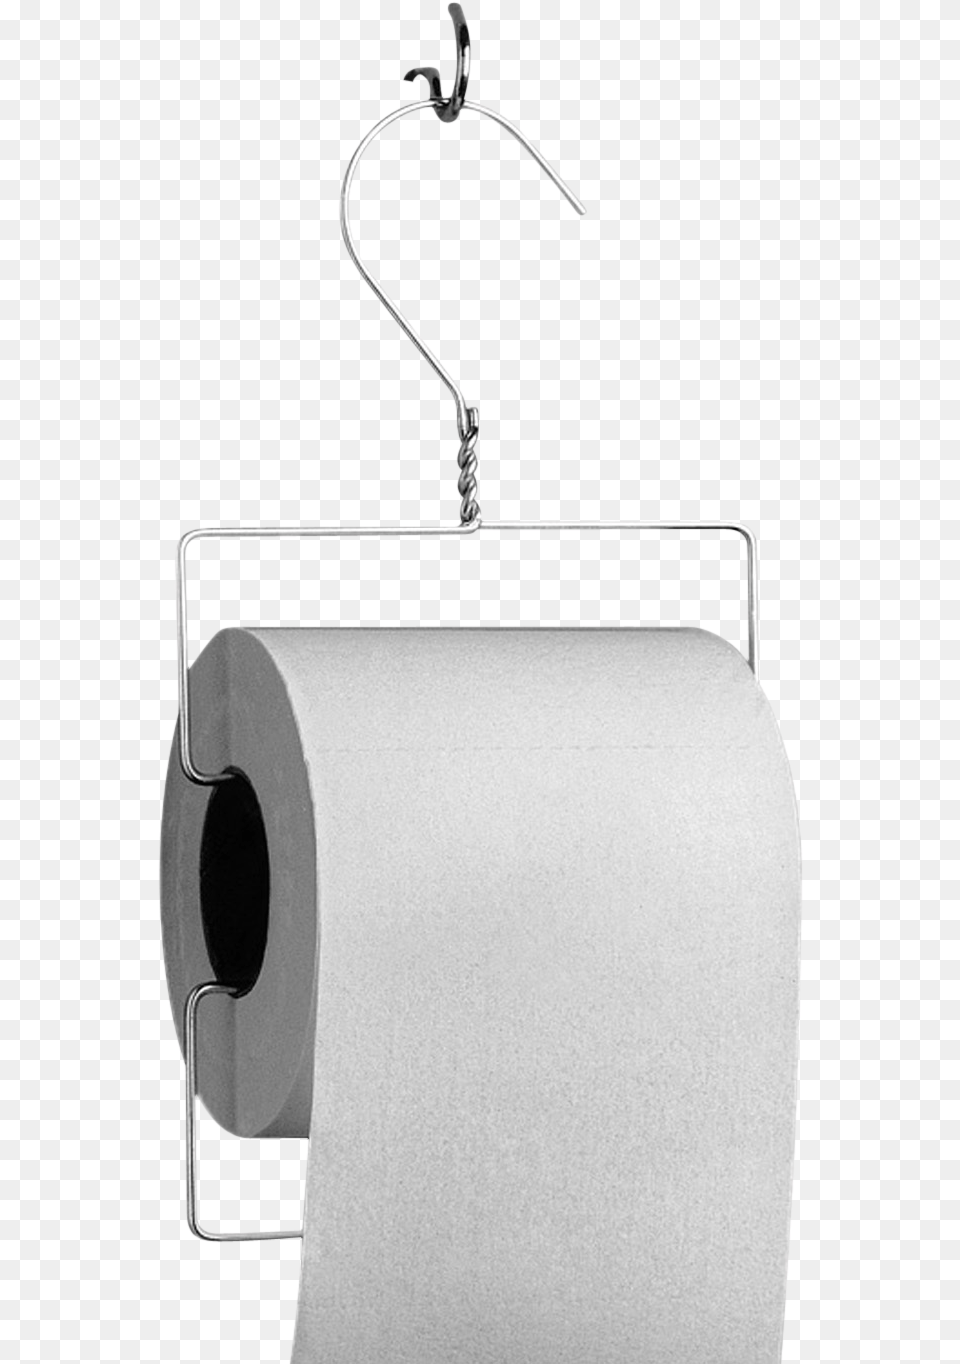 Clojo Toilet Paper Holder By Henk Stalling For Goods 0 Tissue Paper, Towel, Paper Towel, Toilet Paper Free Transparent Png